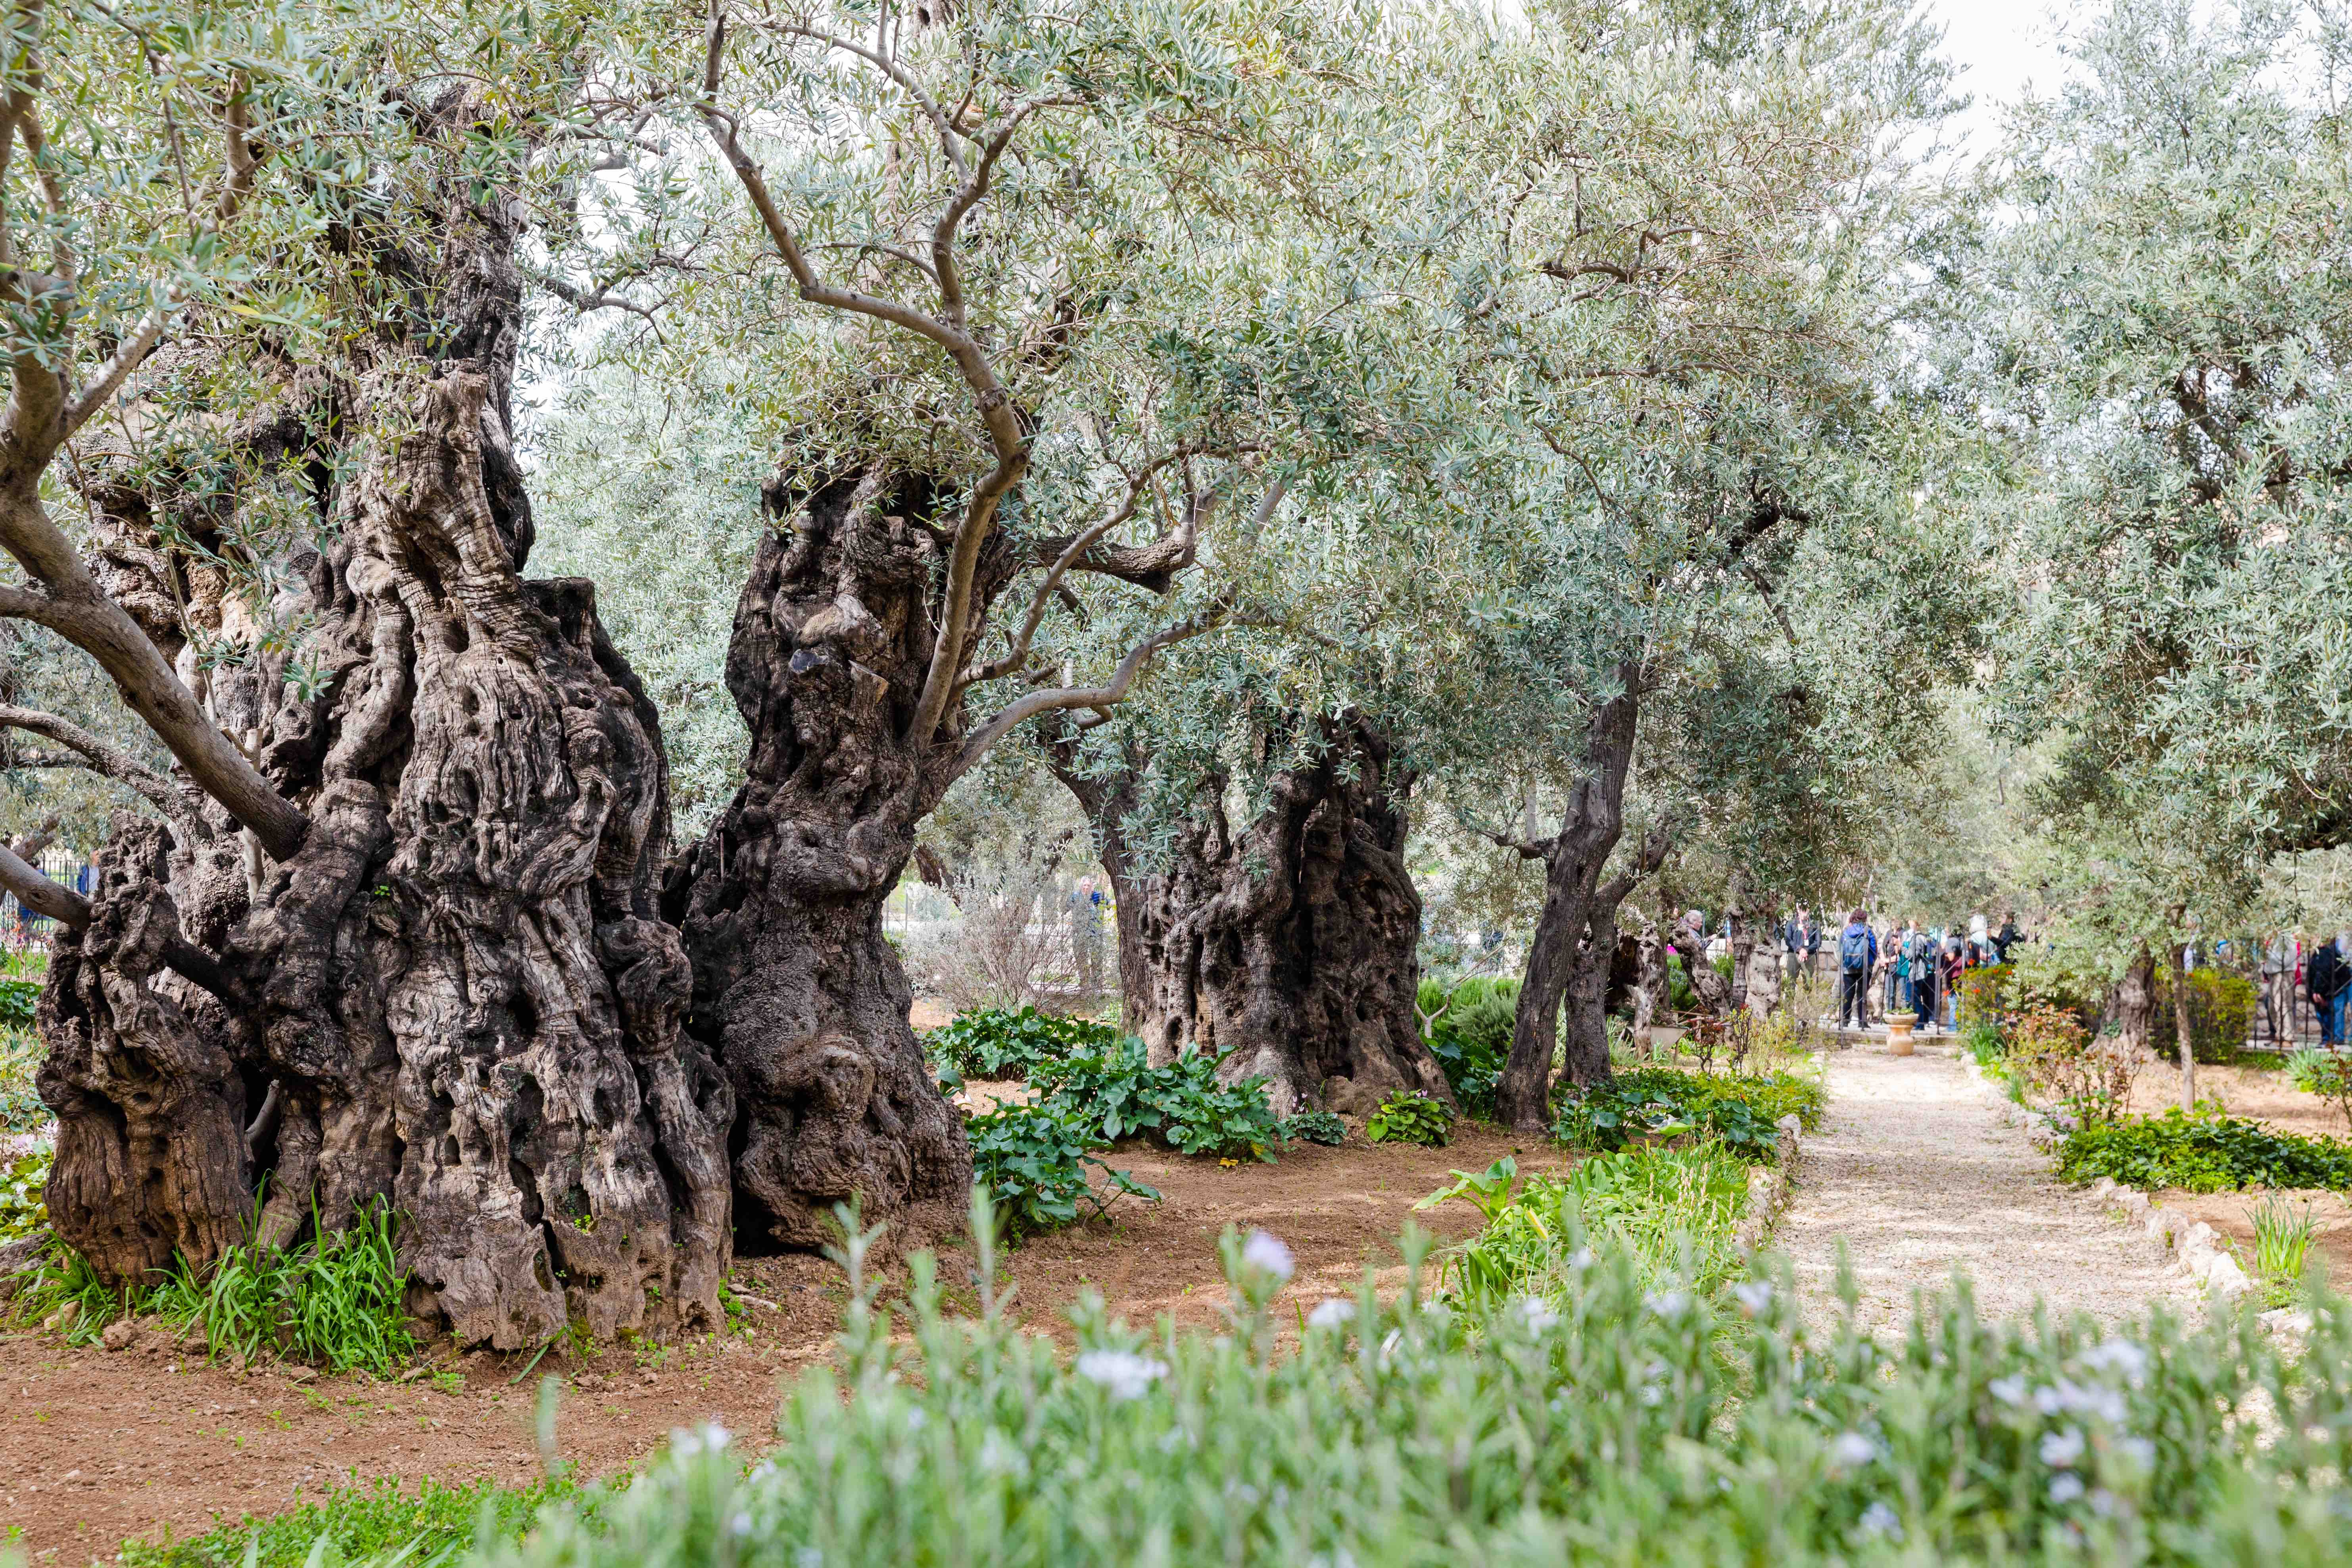 Olive trees surround travelers in the Garden of Gethsemane